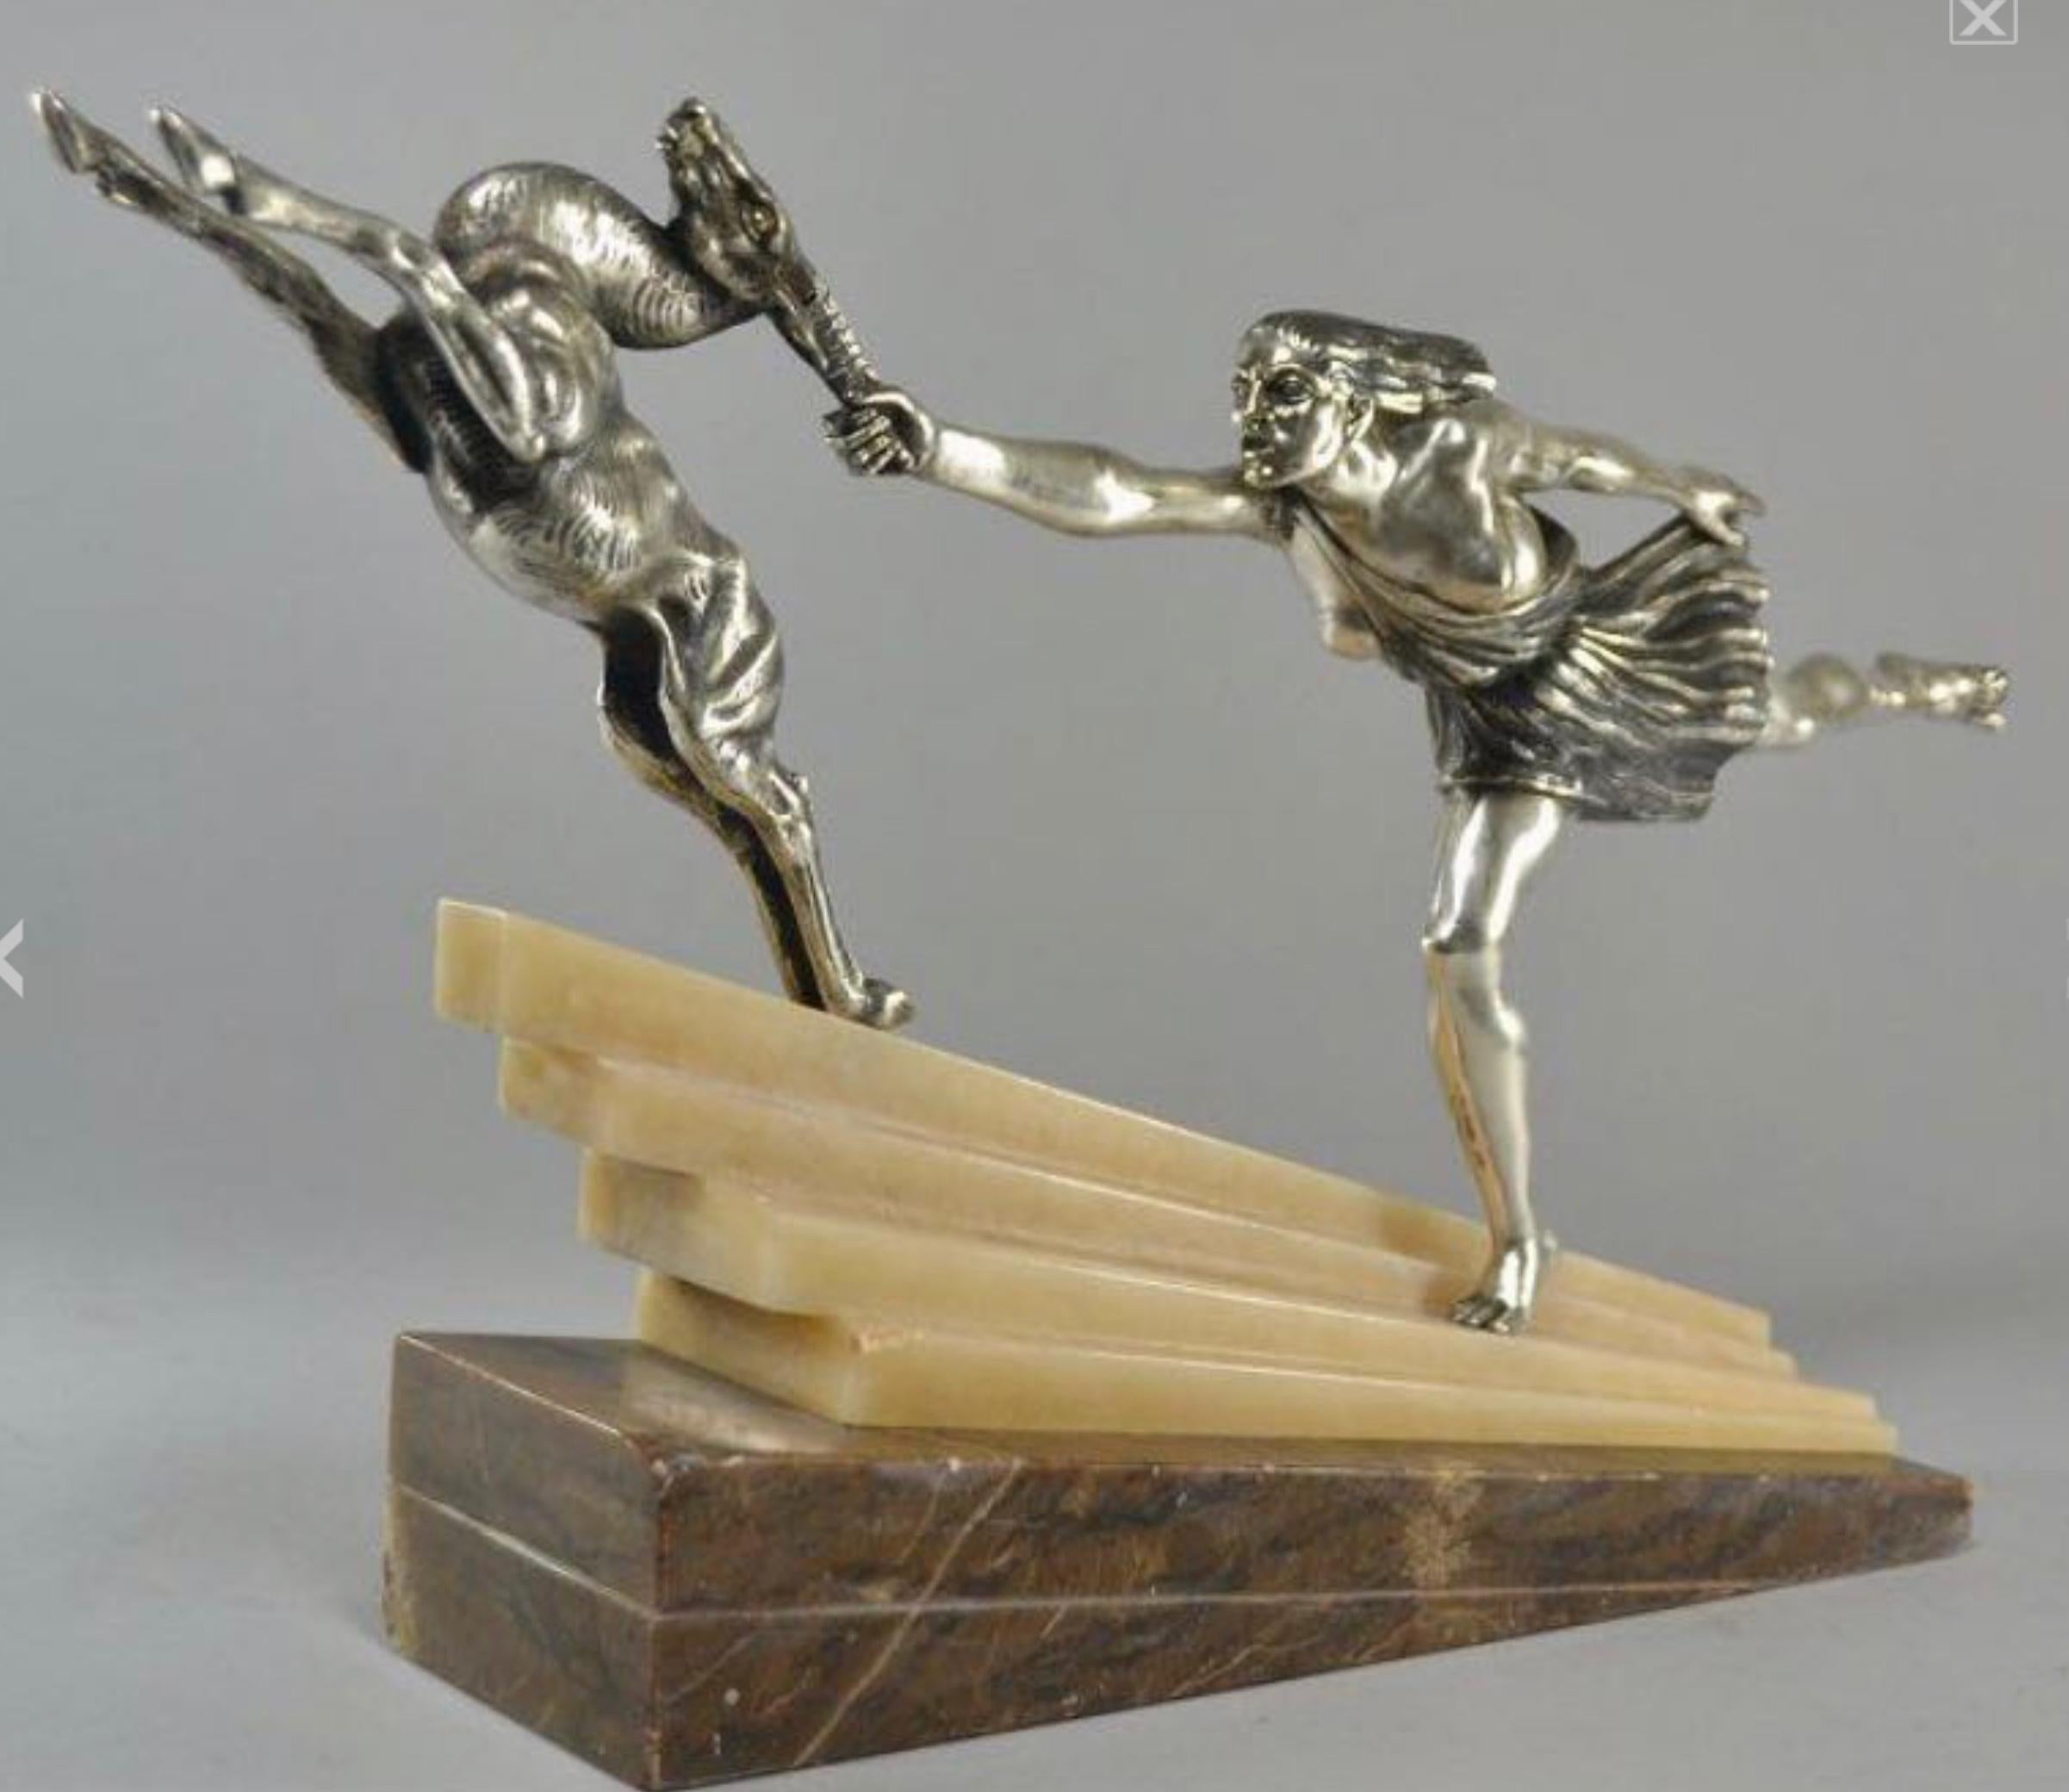 Silvered Bronze Art Deco Statue Pair featuring a woman reaching and grasping the antlers of a deer, a rare version of “Chasing the Hind” Designed by Aurore Onu French circa 1930. It has an outstanding classic and cubist design, with a female figure